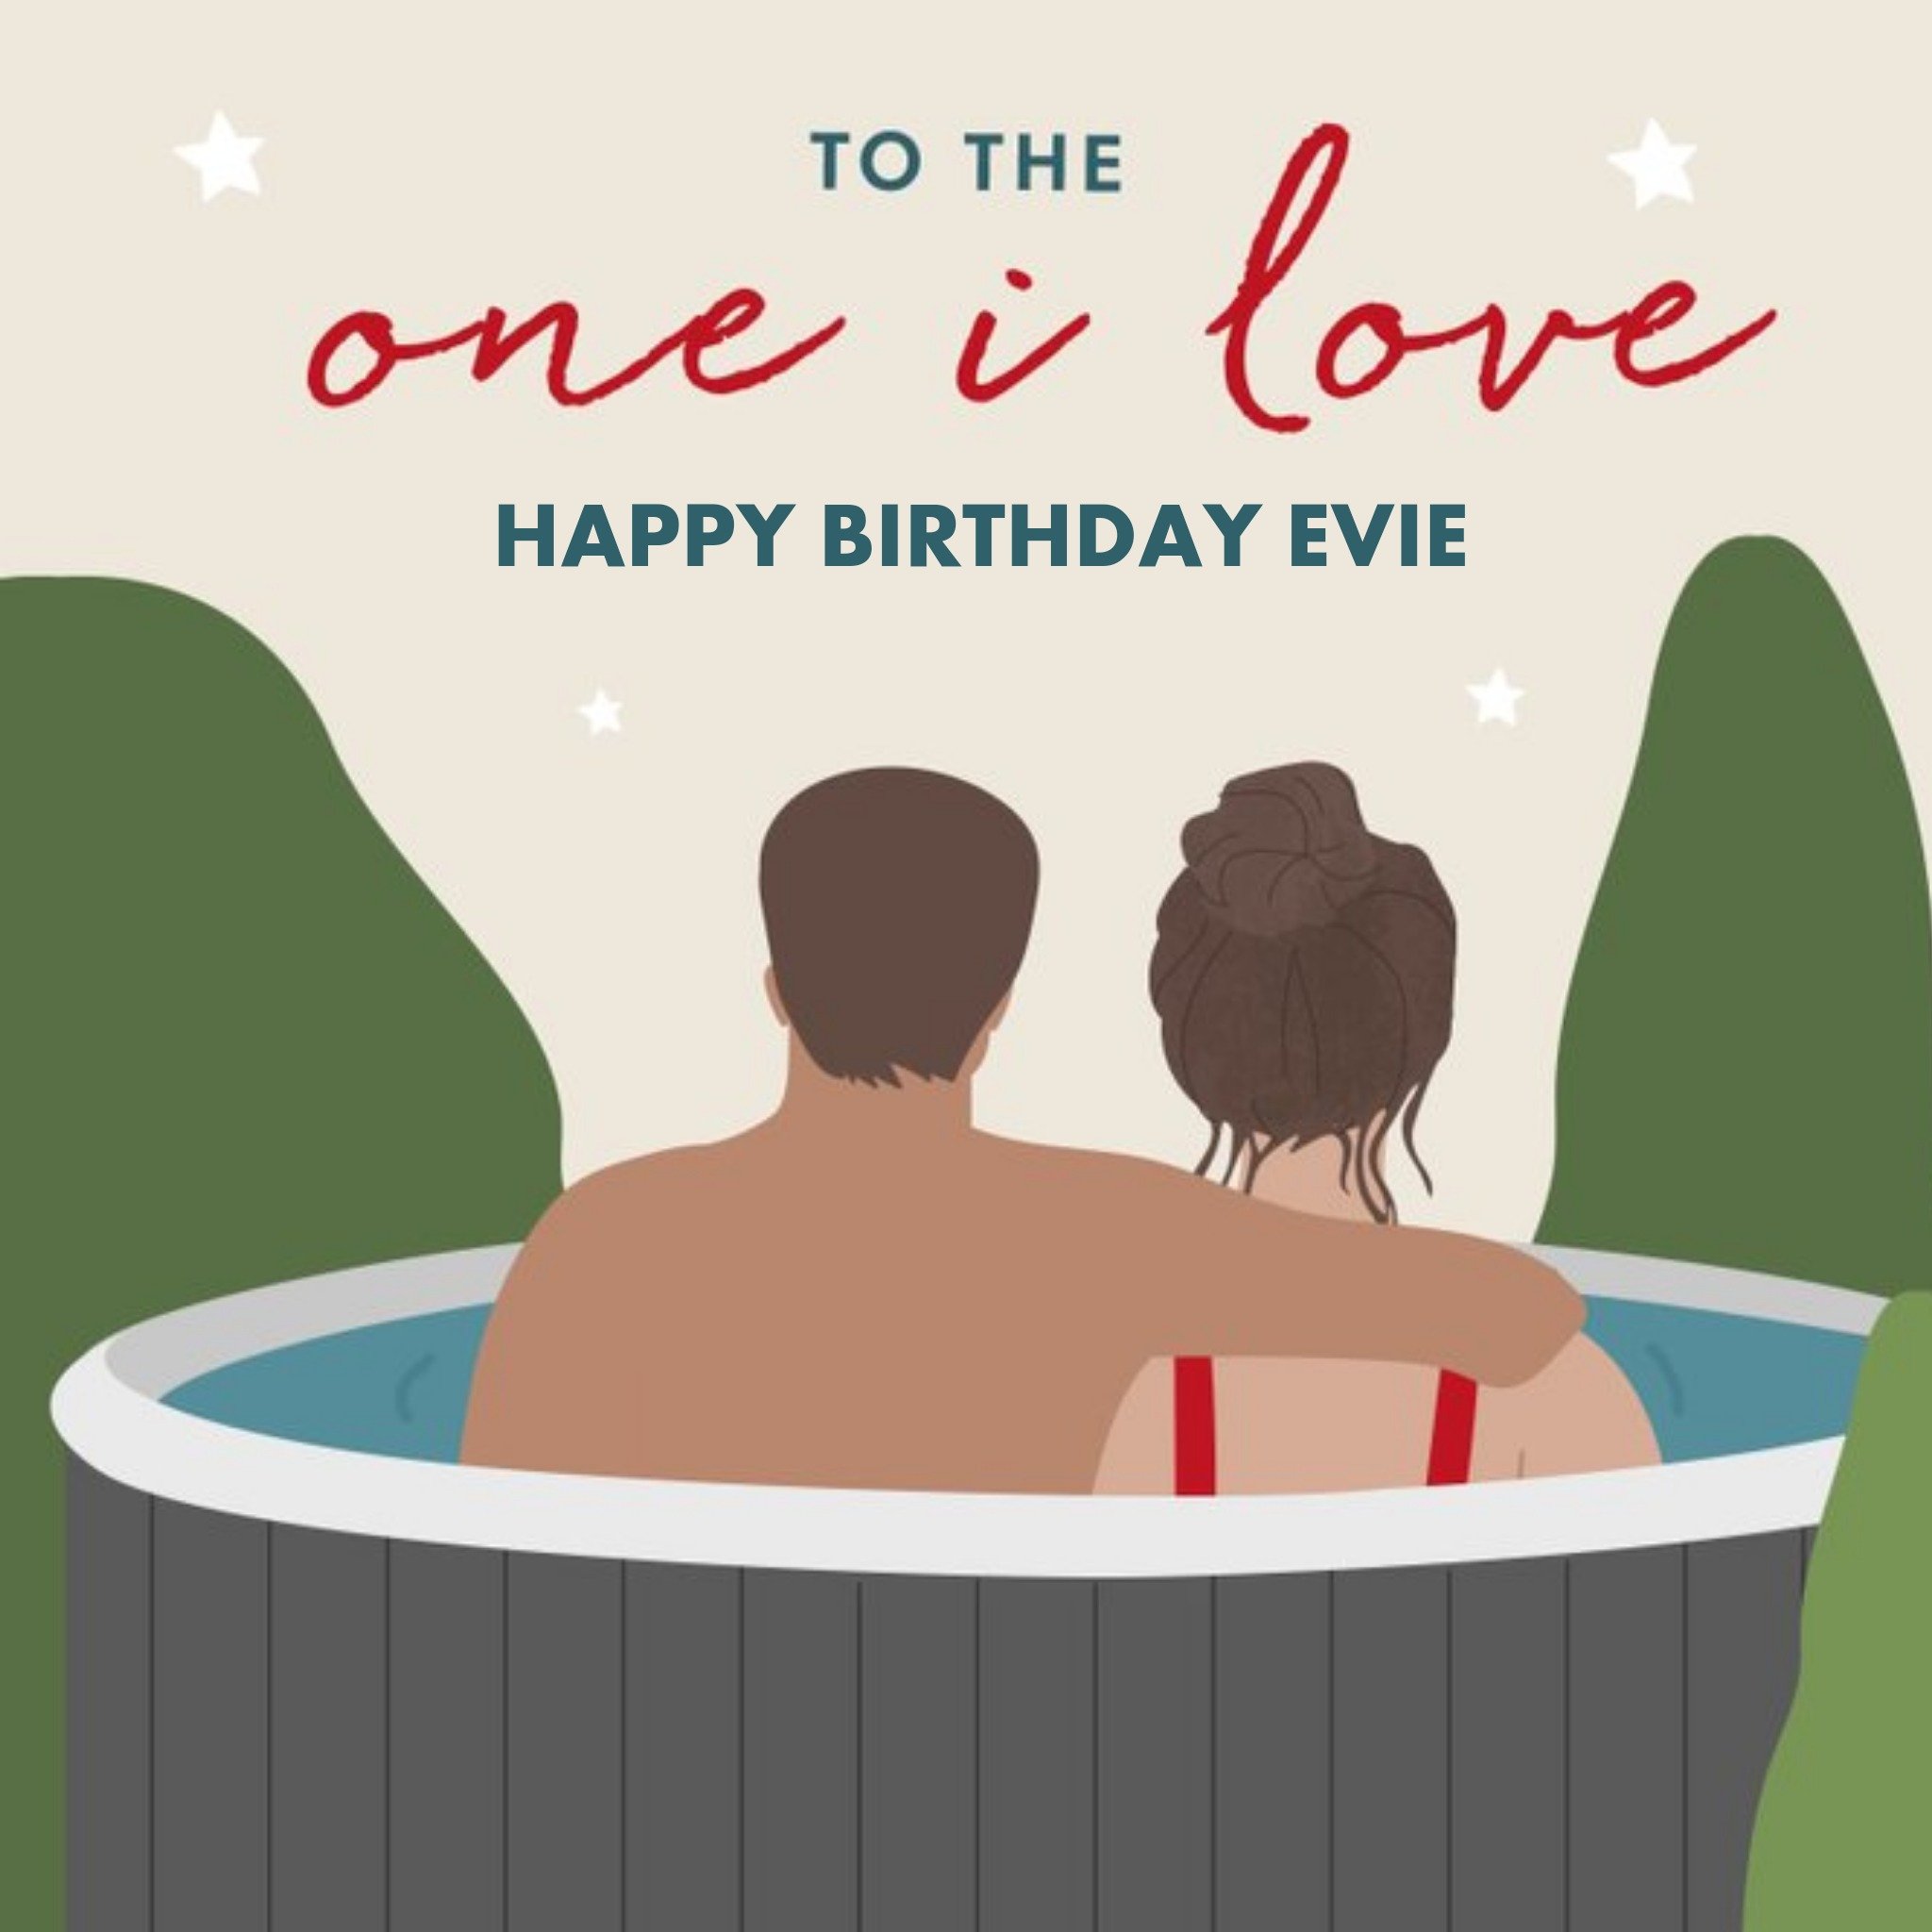 Moonpig Illustration Of A Couple In A Hot Tub To The One I Love Happy Birthday Card, Square